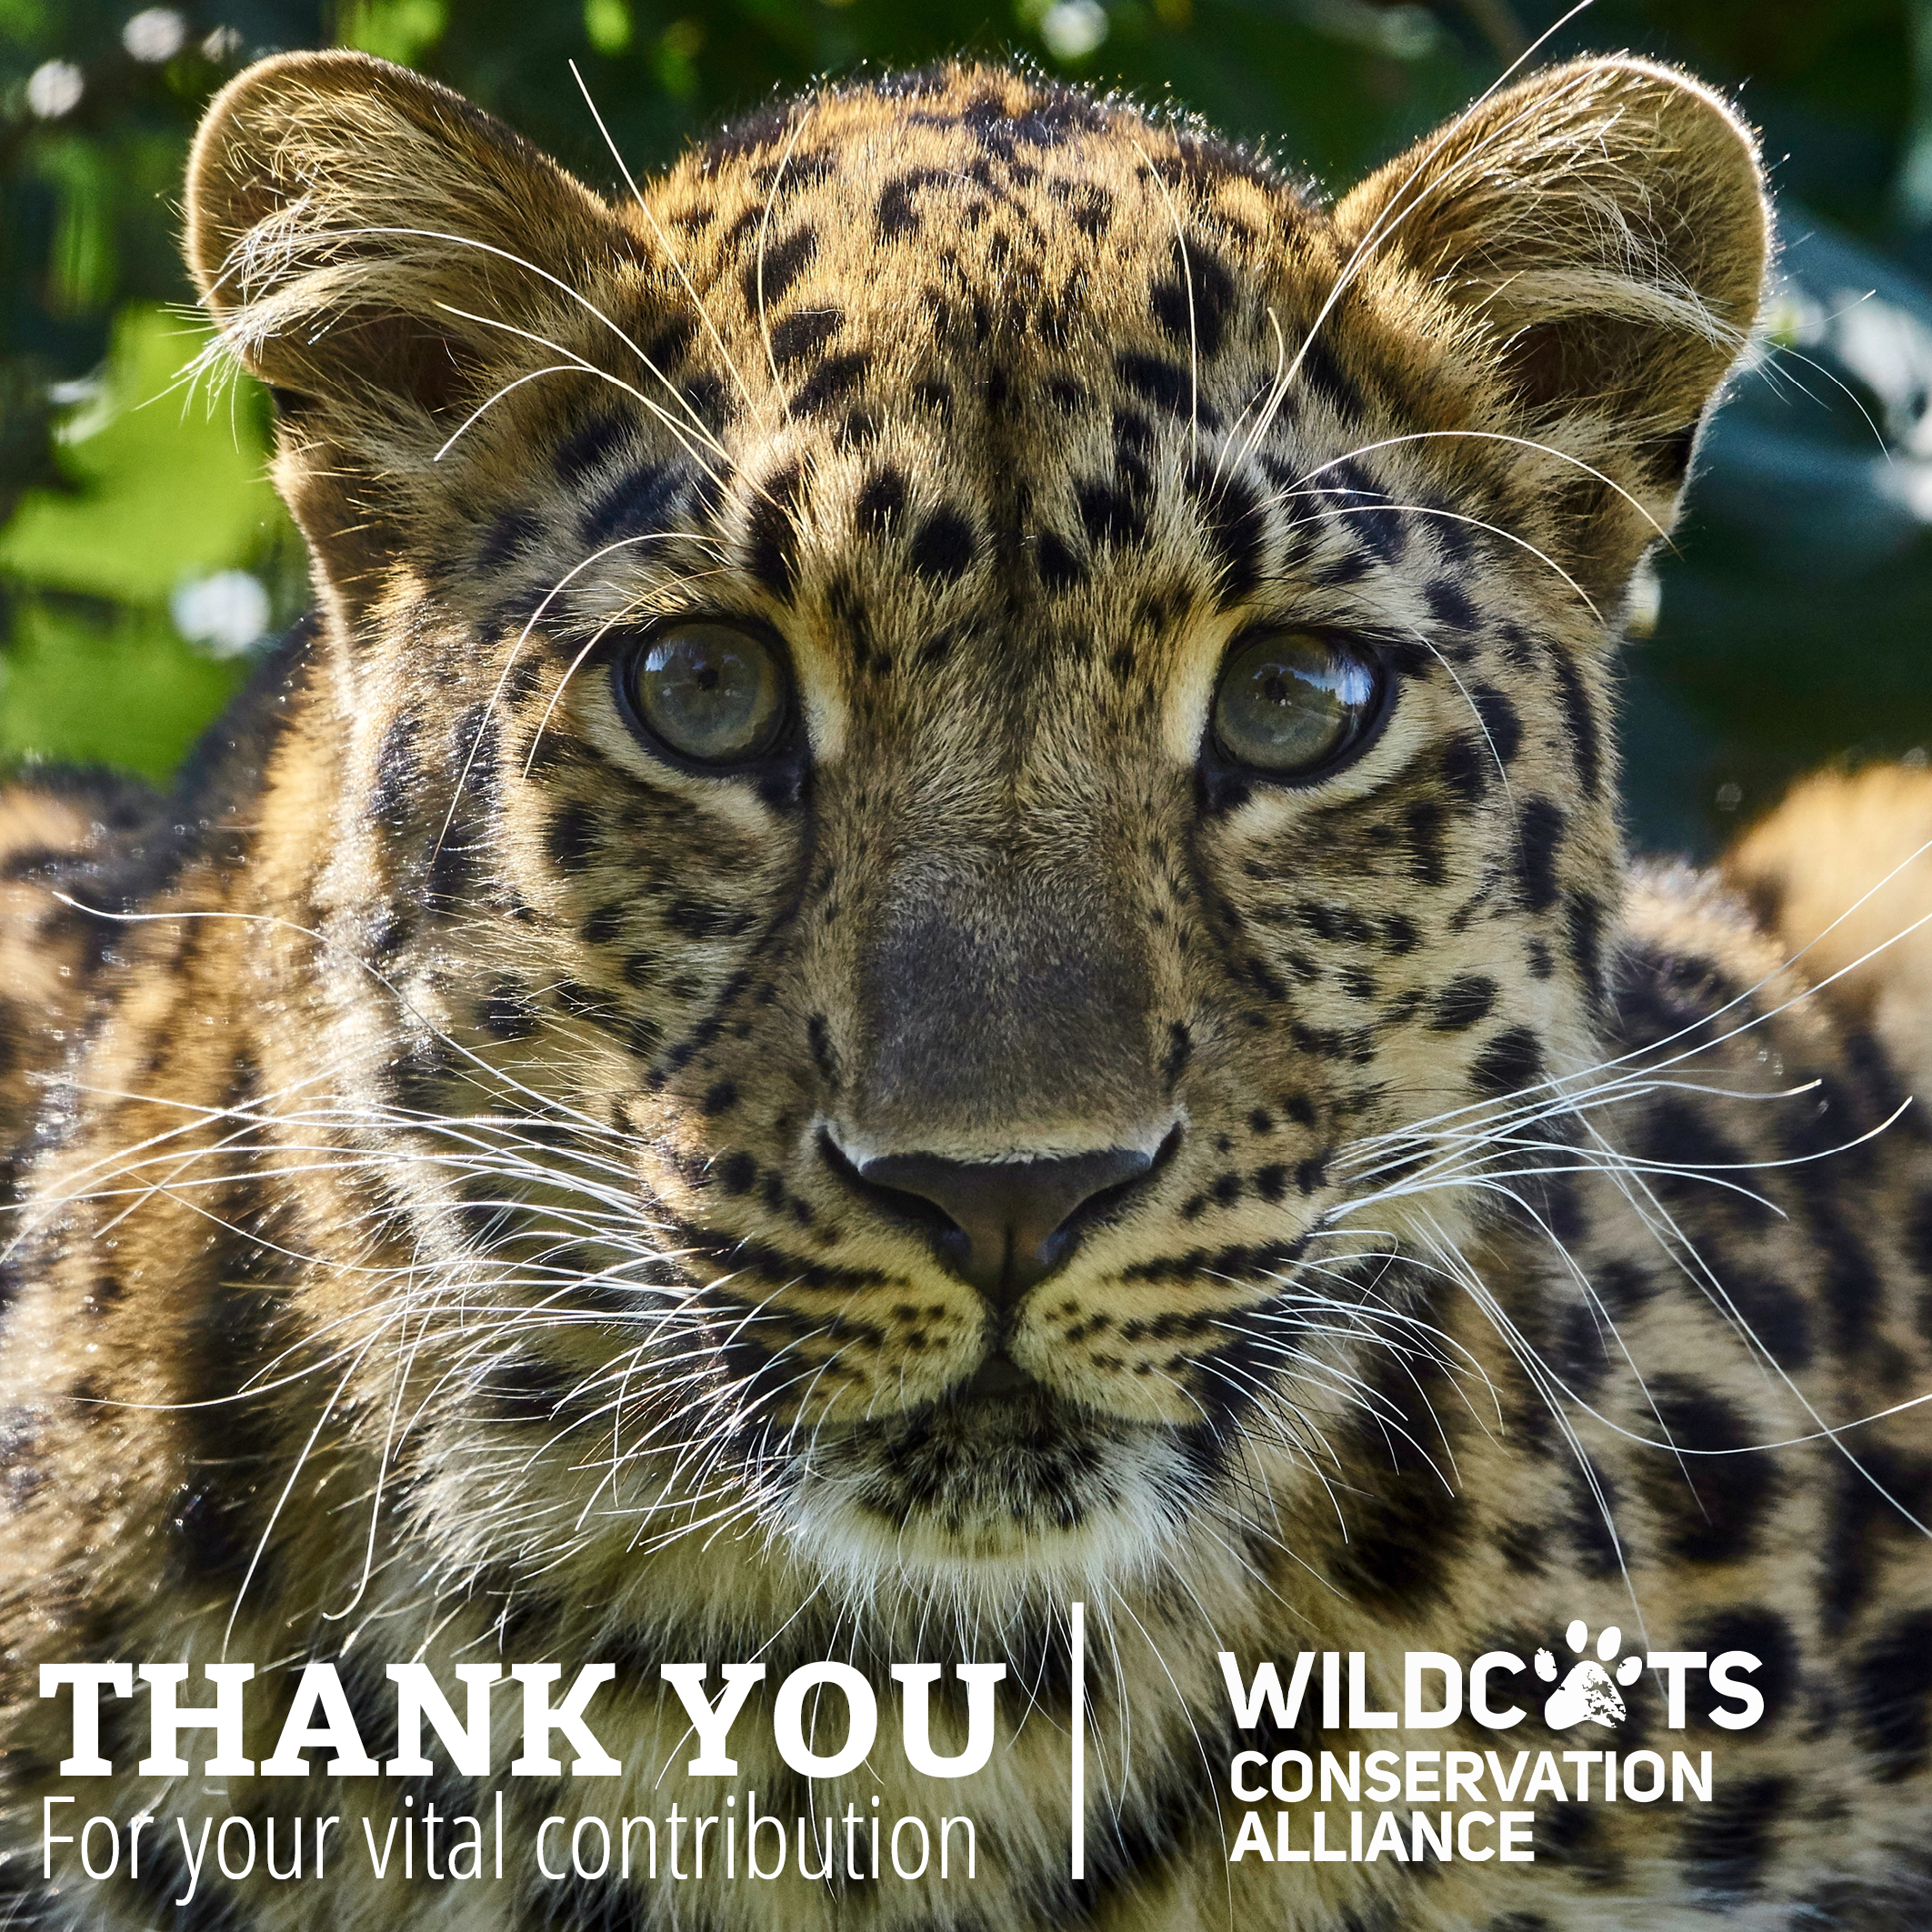 Thank you for your donation to Amur cats